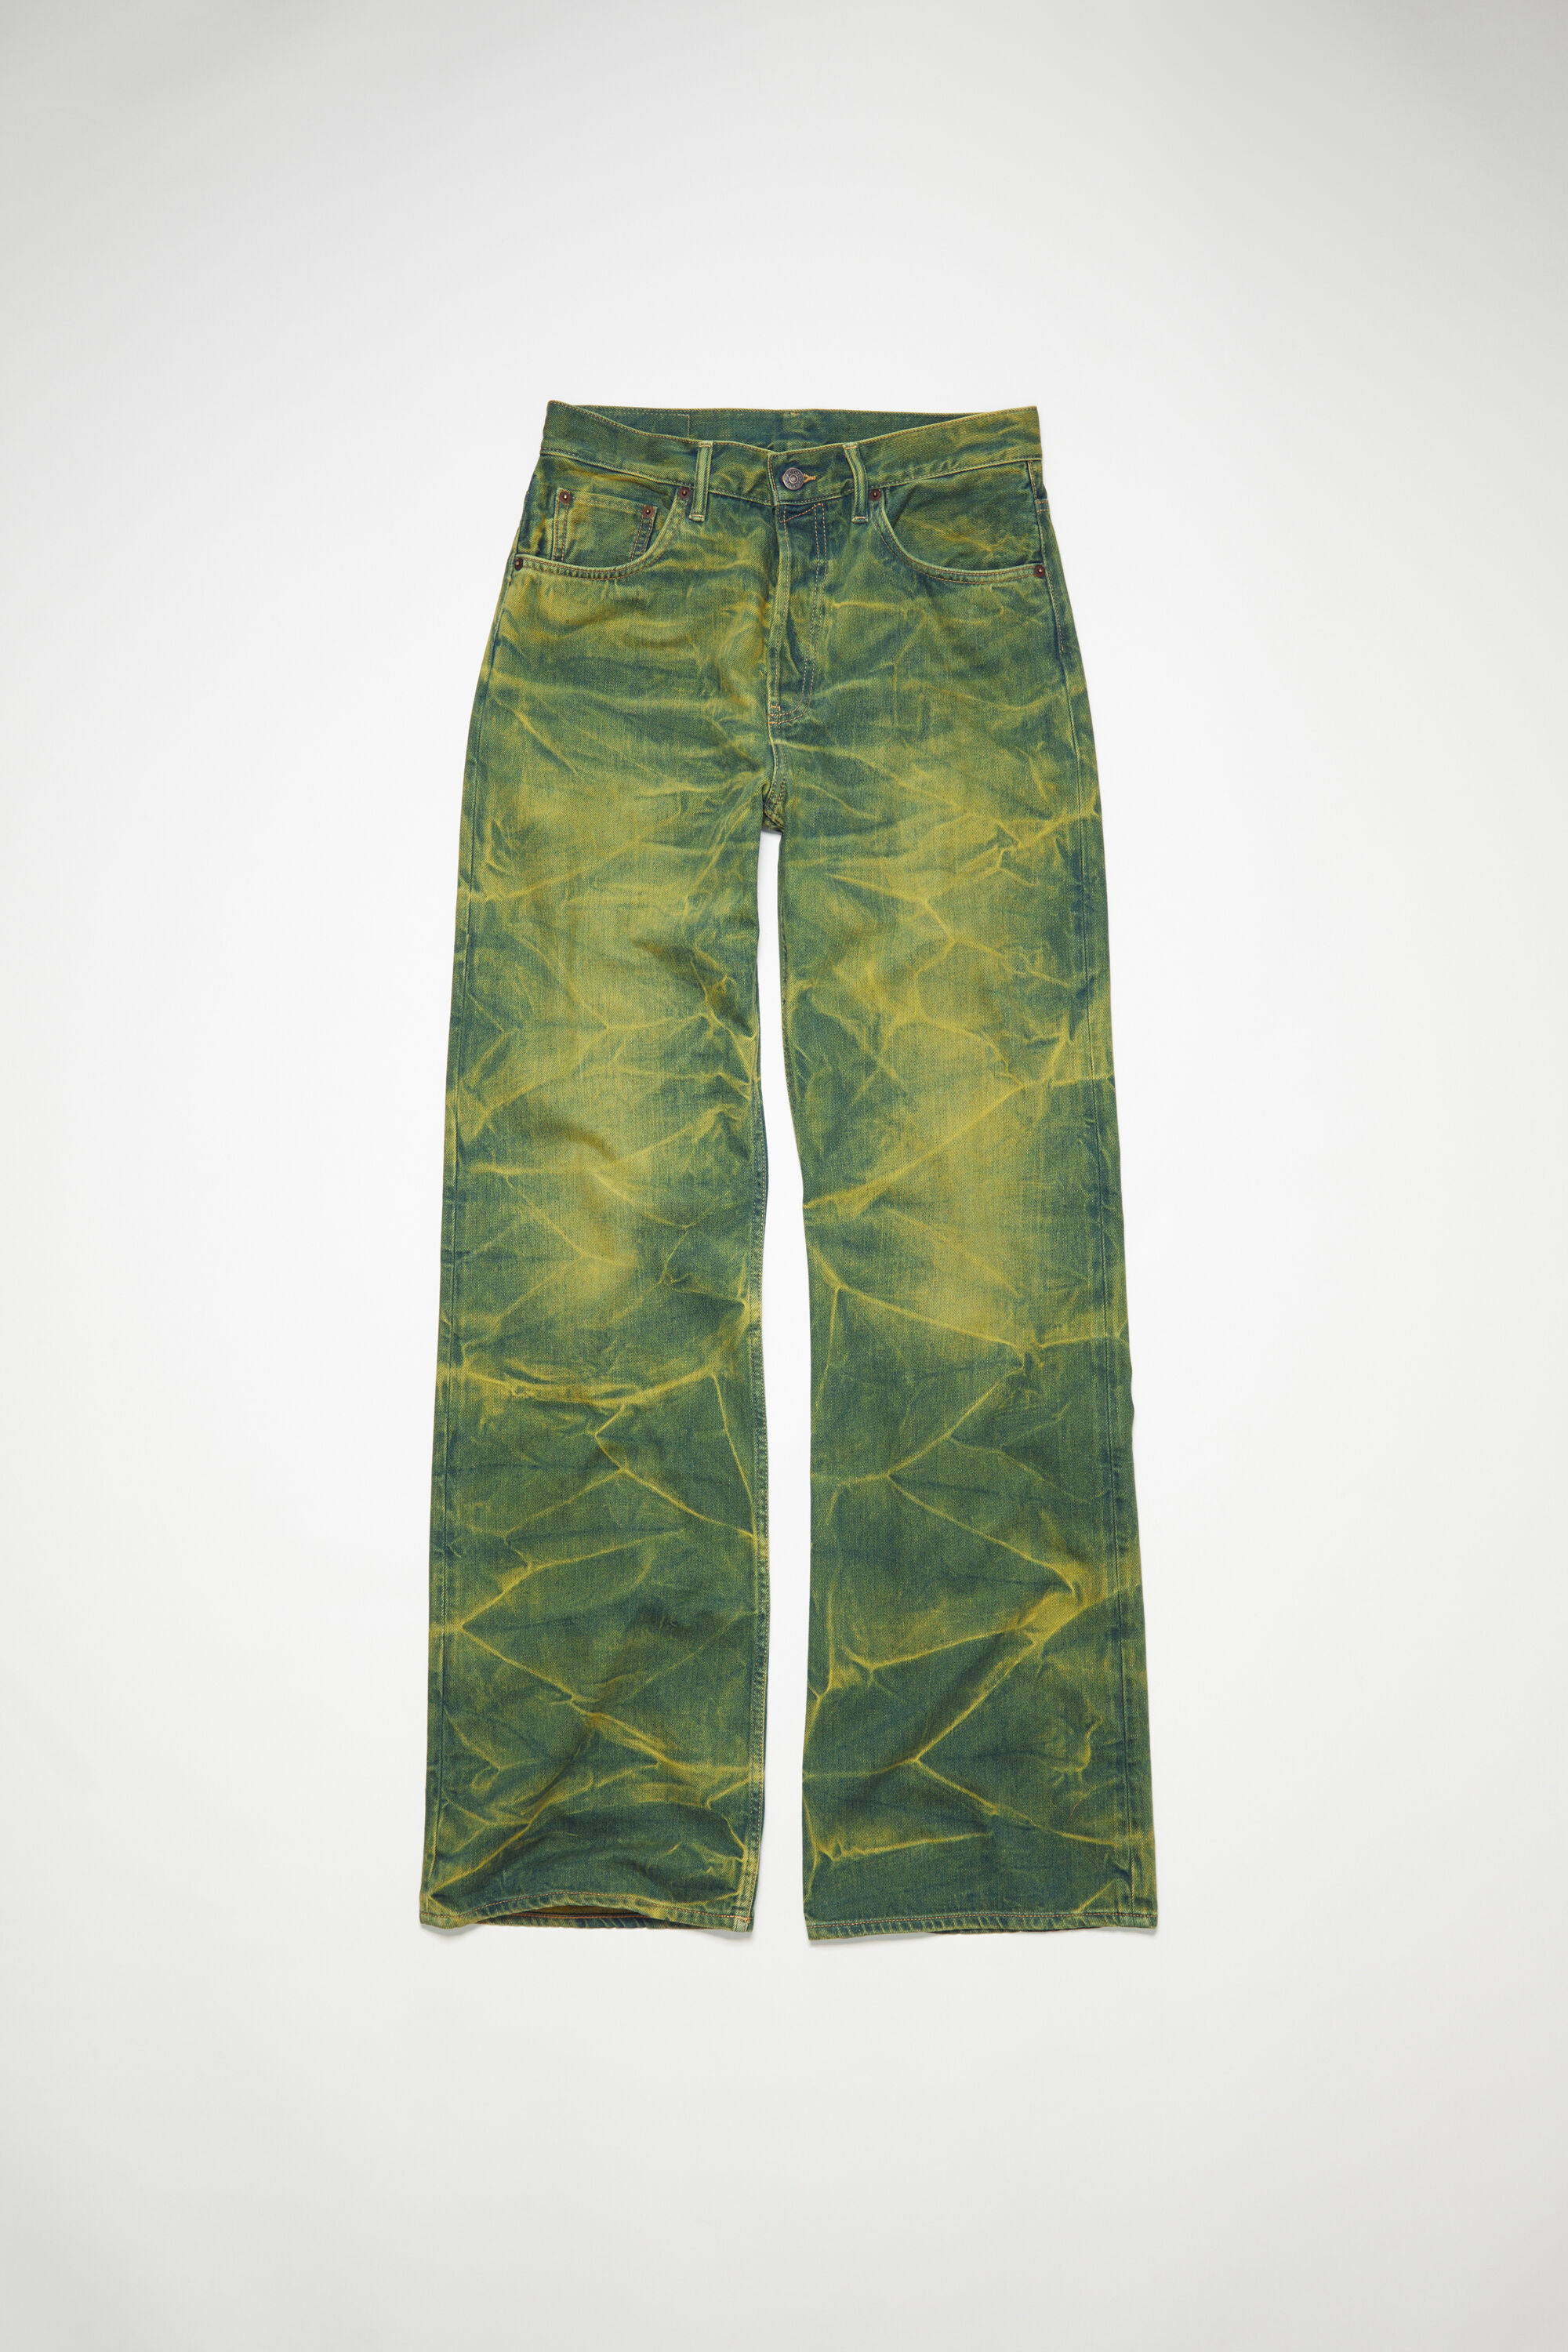 Acne Studios - Loose fit jeans - 2021M - Yellow/blue